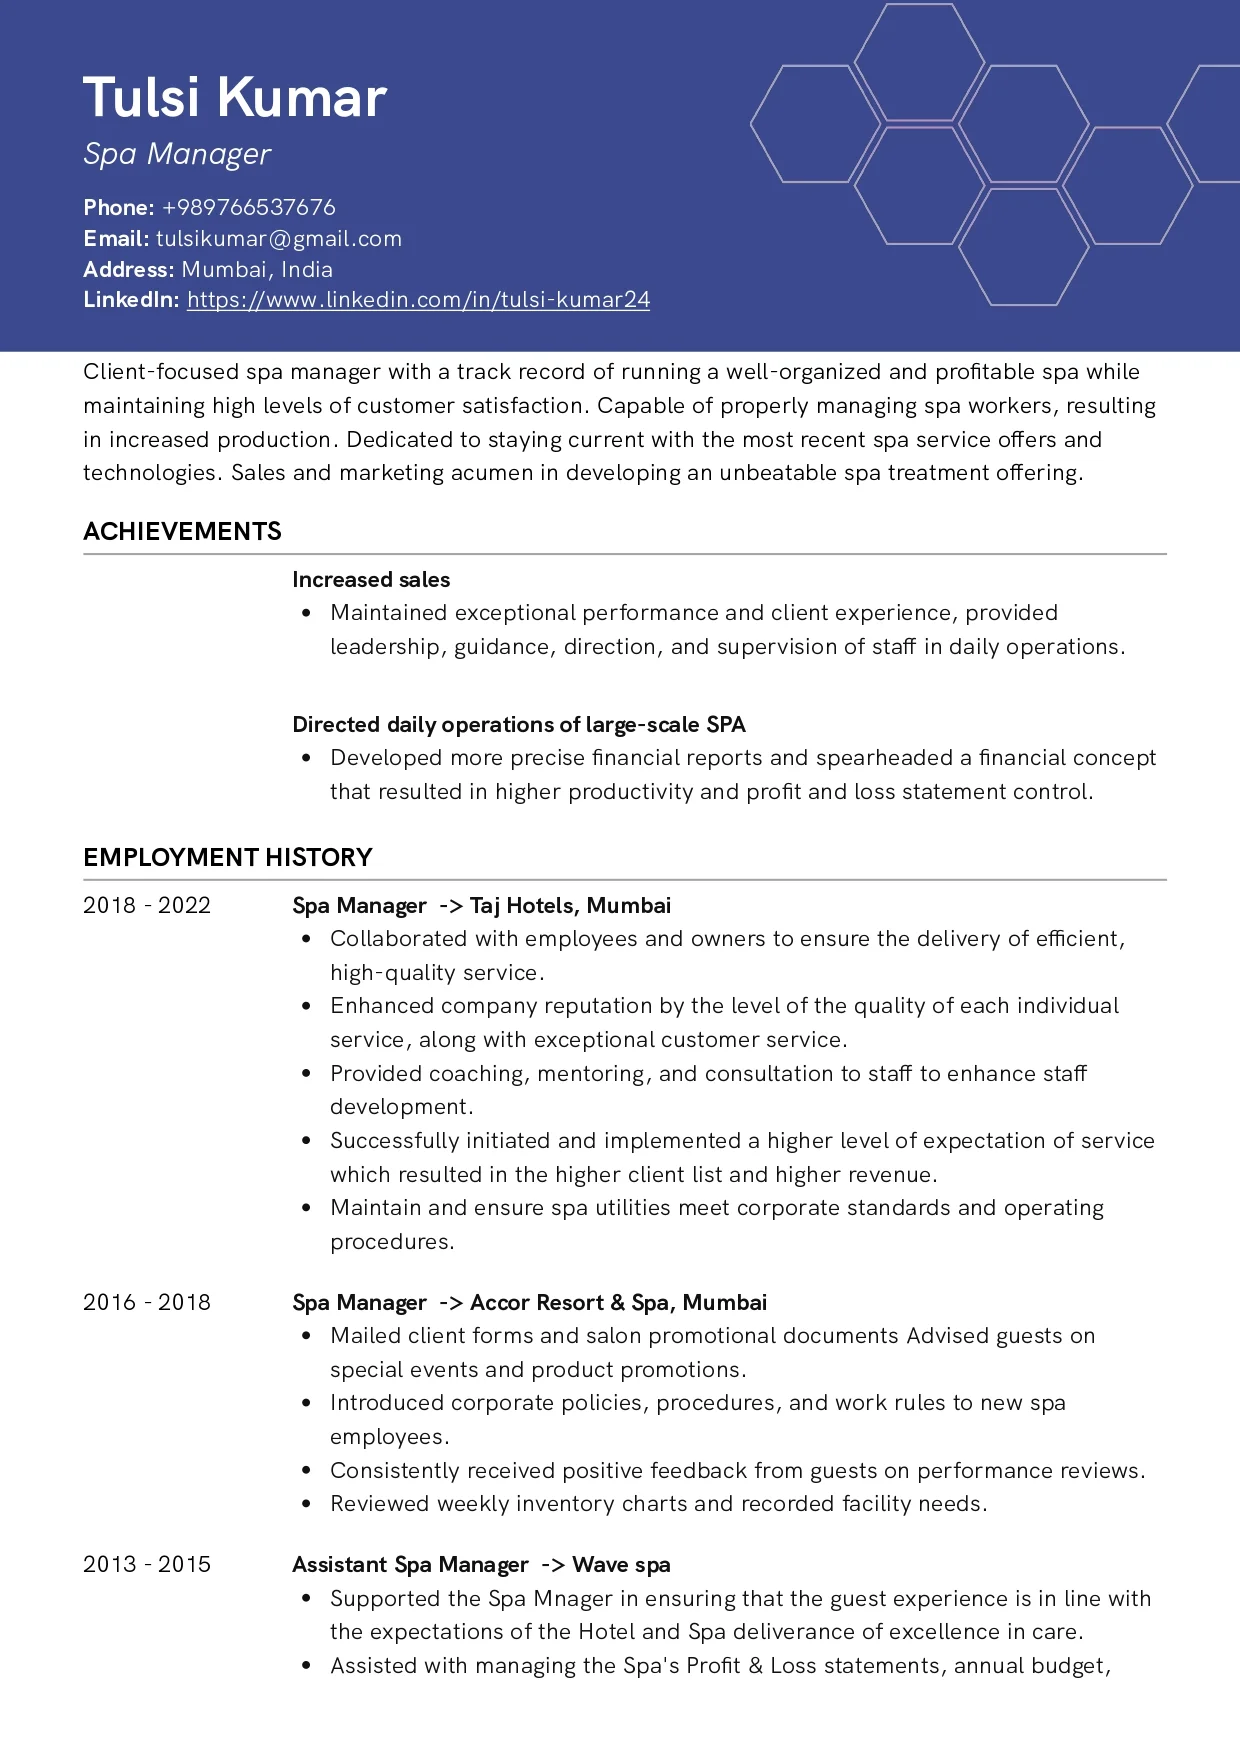 Sample Resume of Spa Manager | Free Resume Templates & Samples on Resumod.co